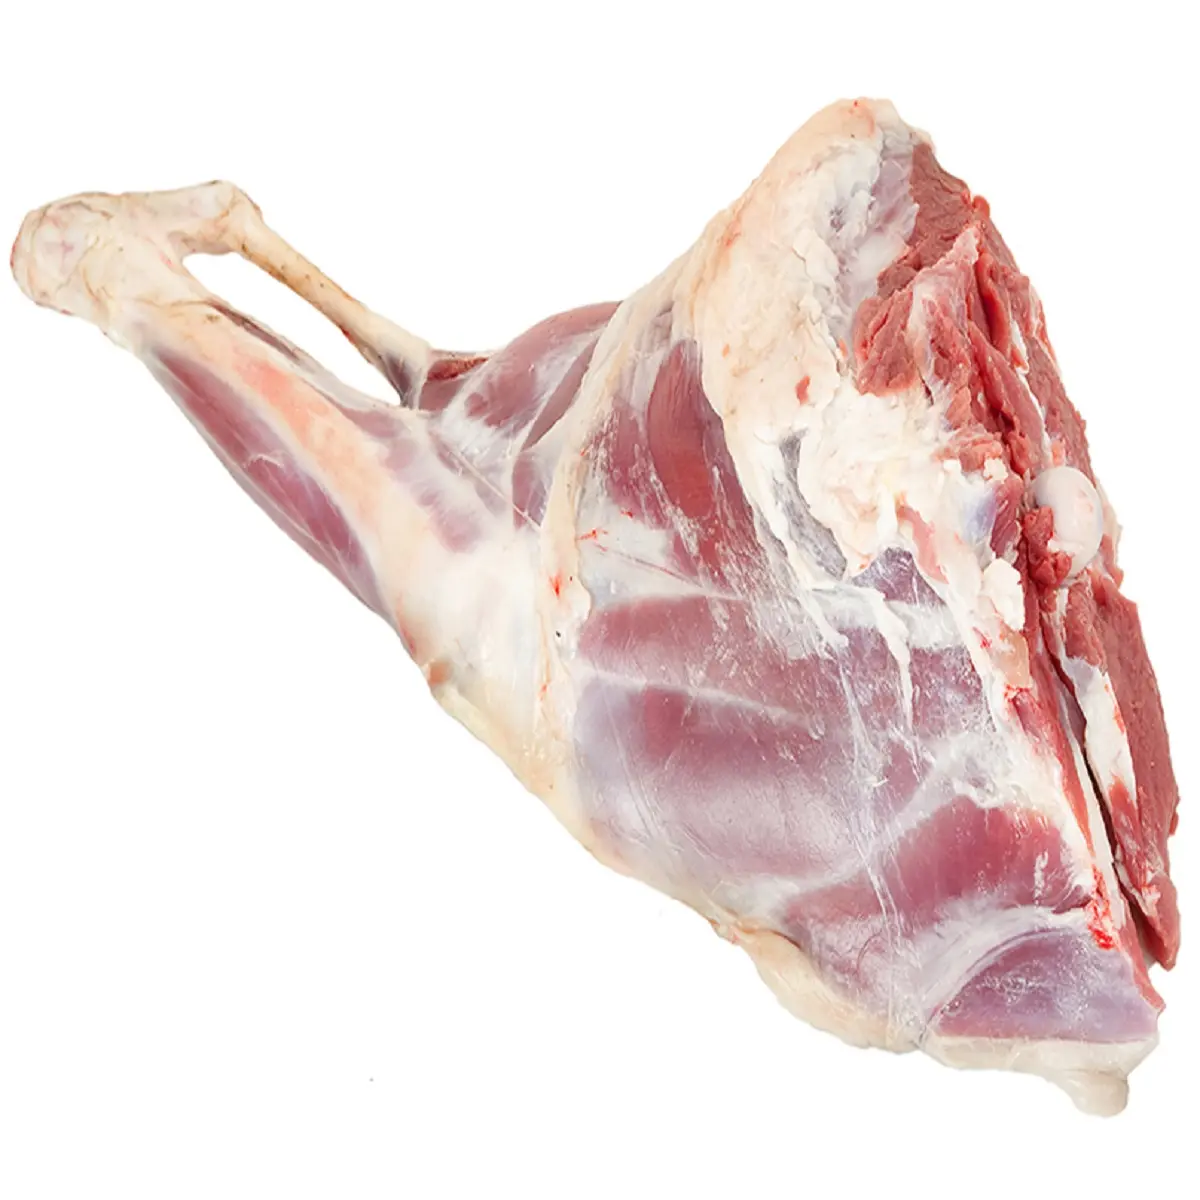 High Quality standard Frozen halal lamb/sheep at affordable prices